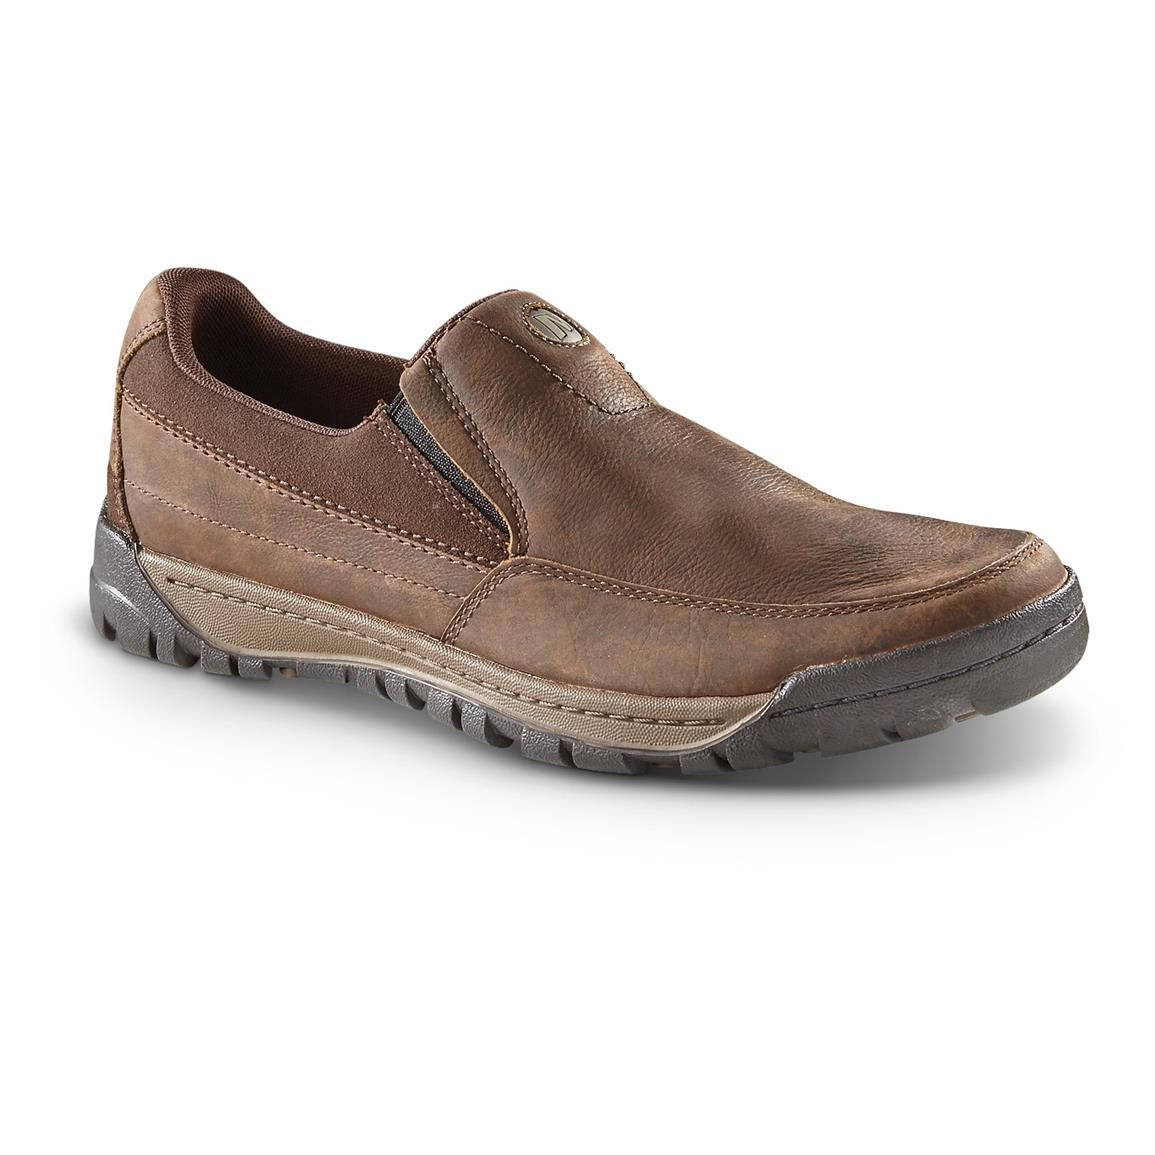 Merrell Men's Traveler Rove Slip-on Shoes - 668601, Casual Shoes at ...